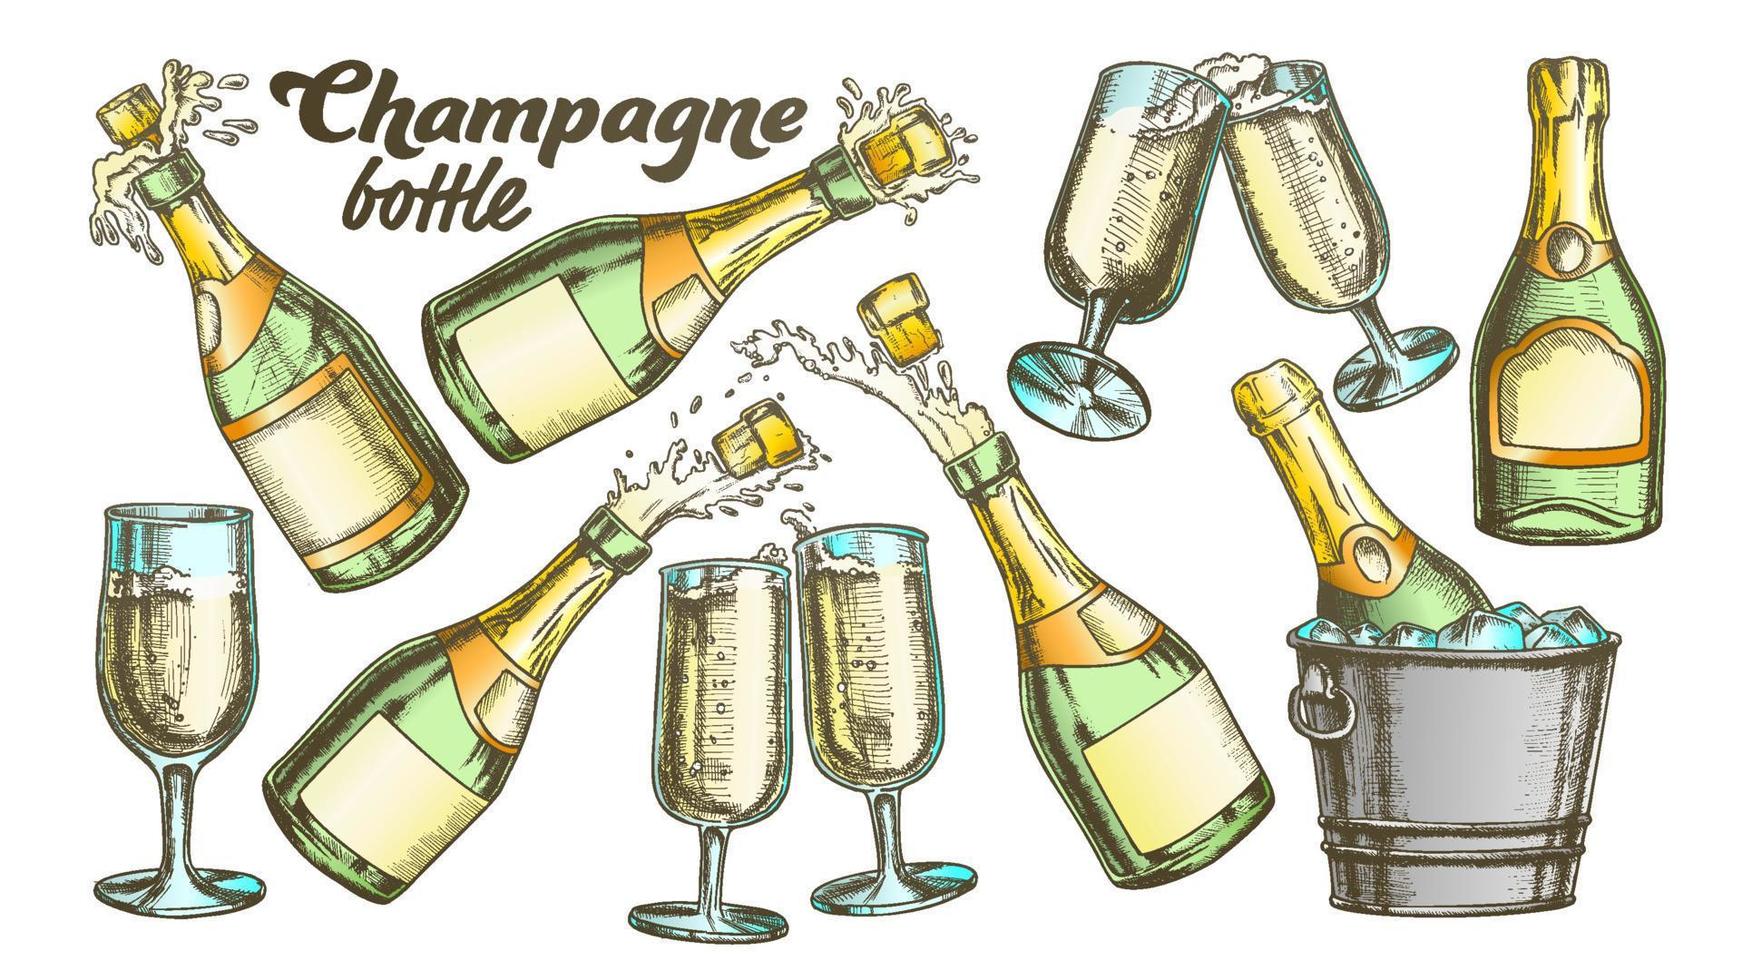 Champagne Bottle And Glass Color Set Vector